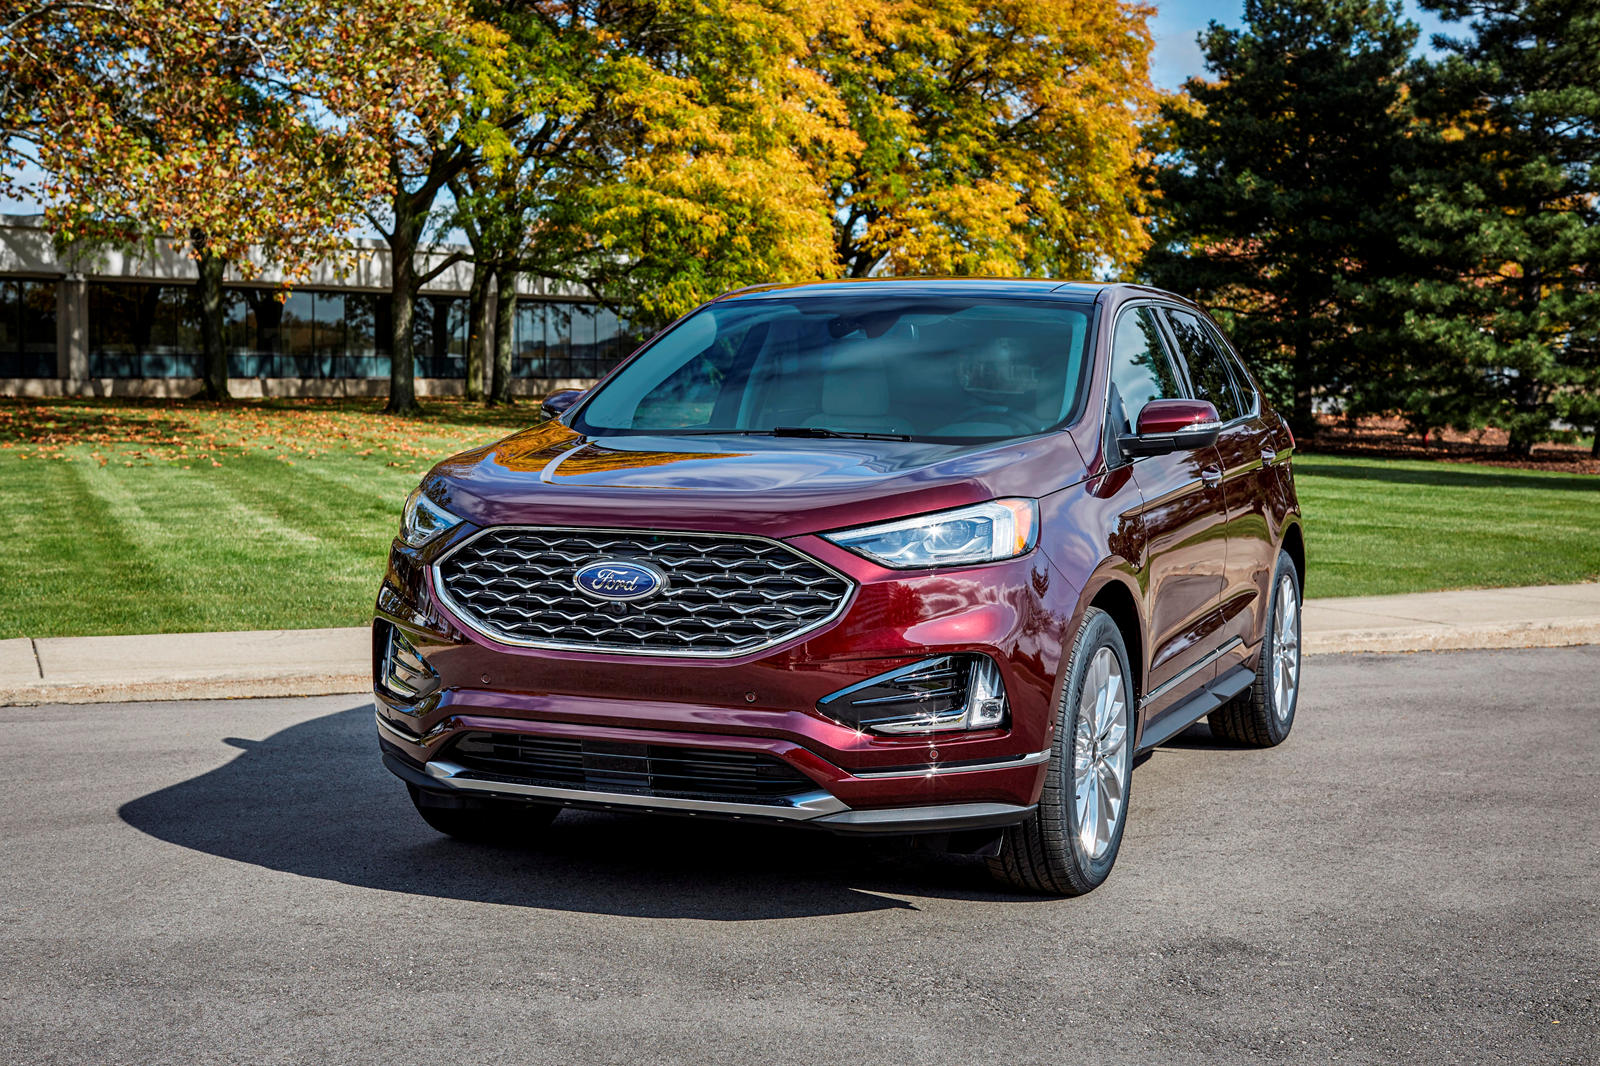 2021 Ford Edge Arrives With A Massive Touchscreen | CarBuzz